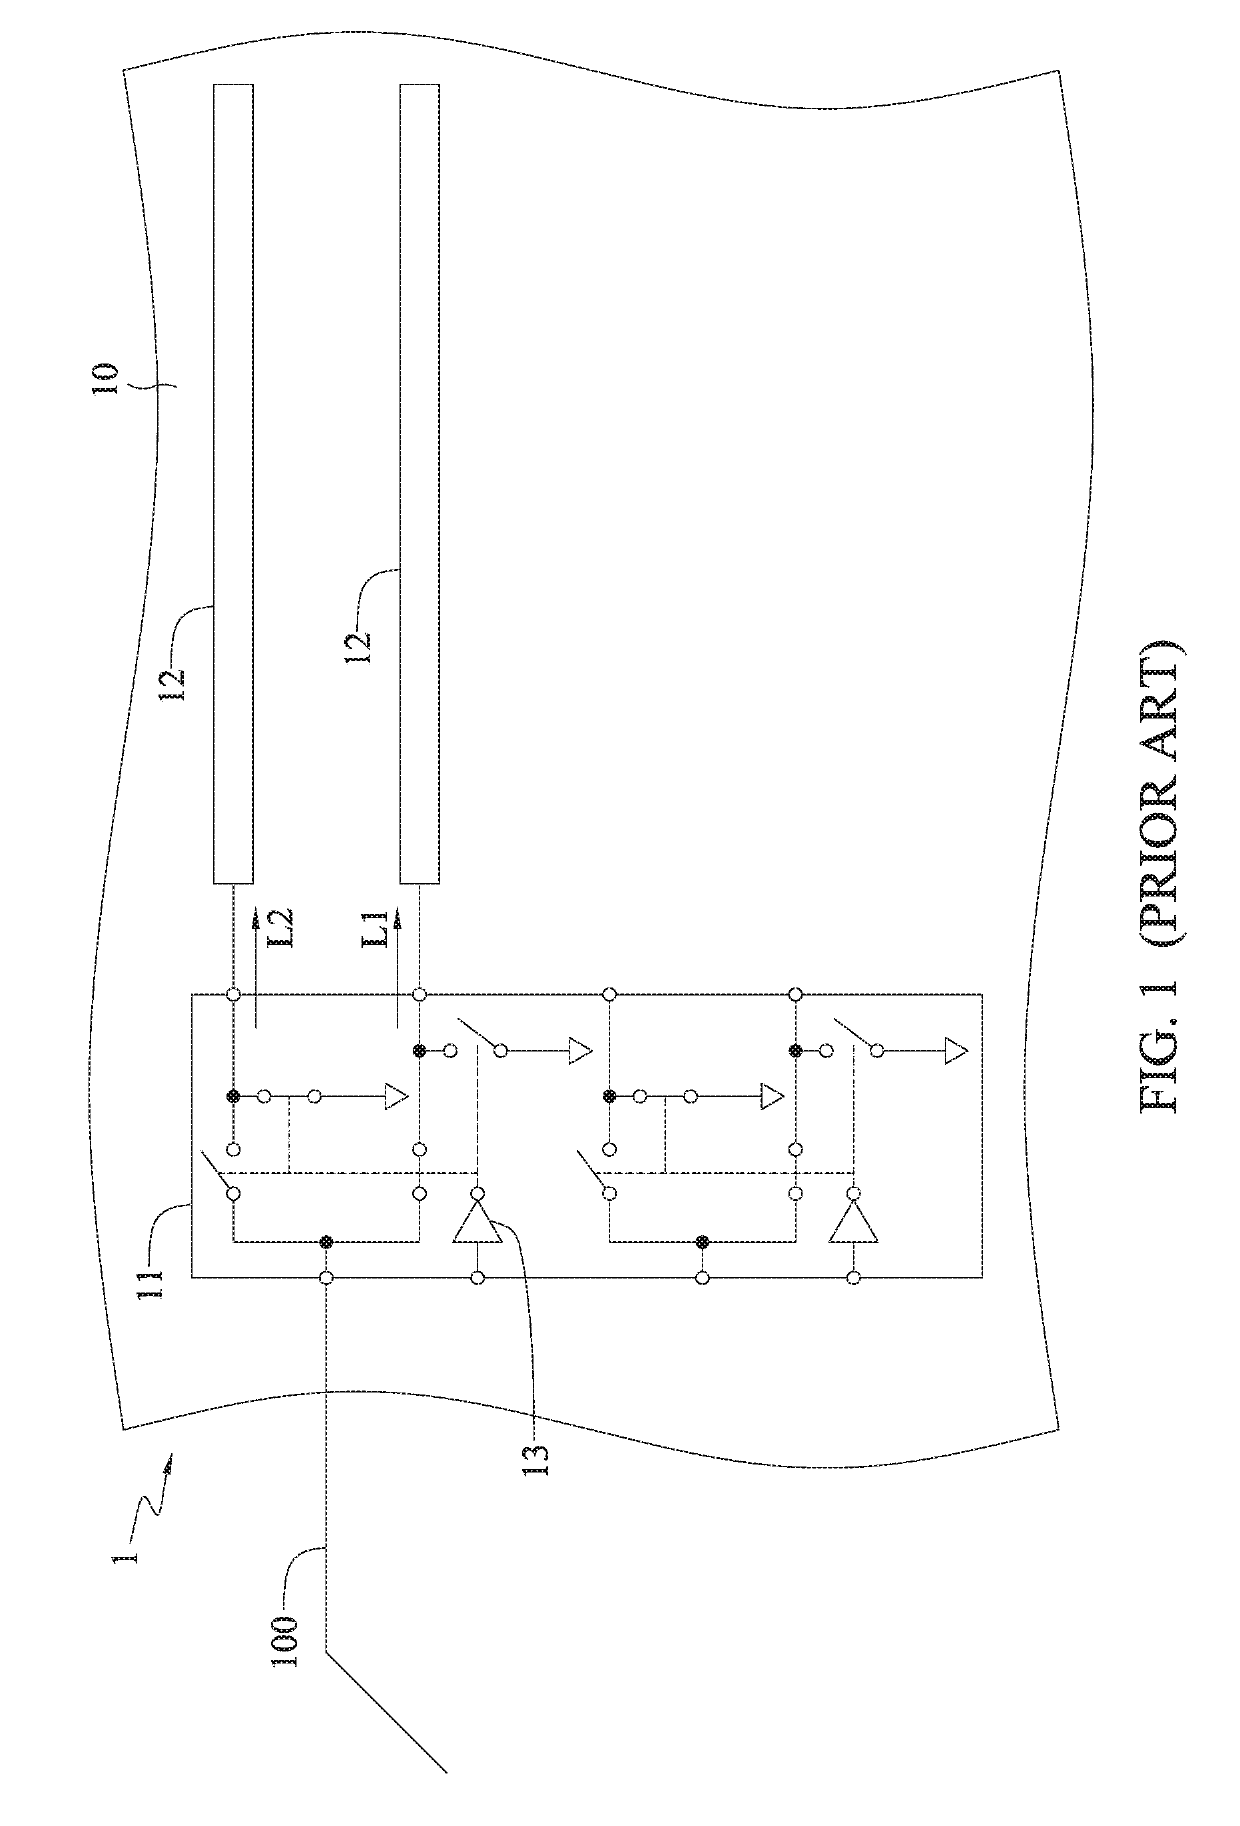 Circuit board for testing and method of operating the same